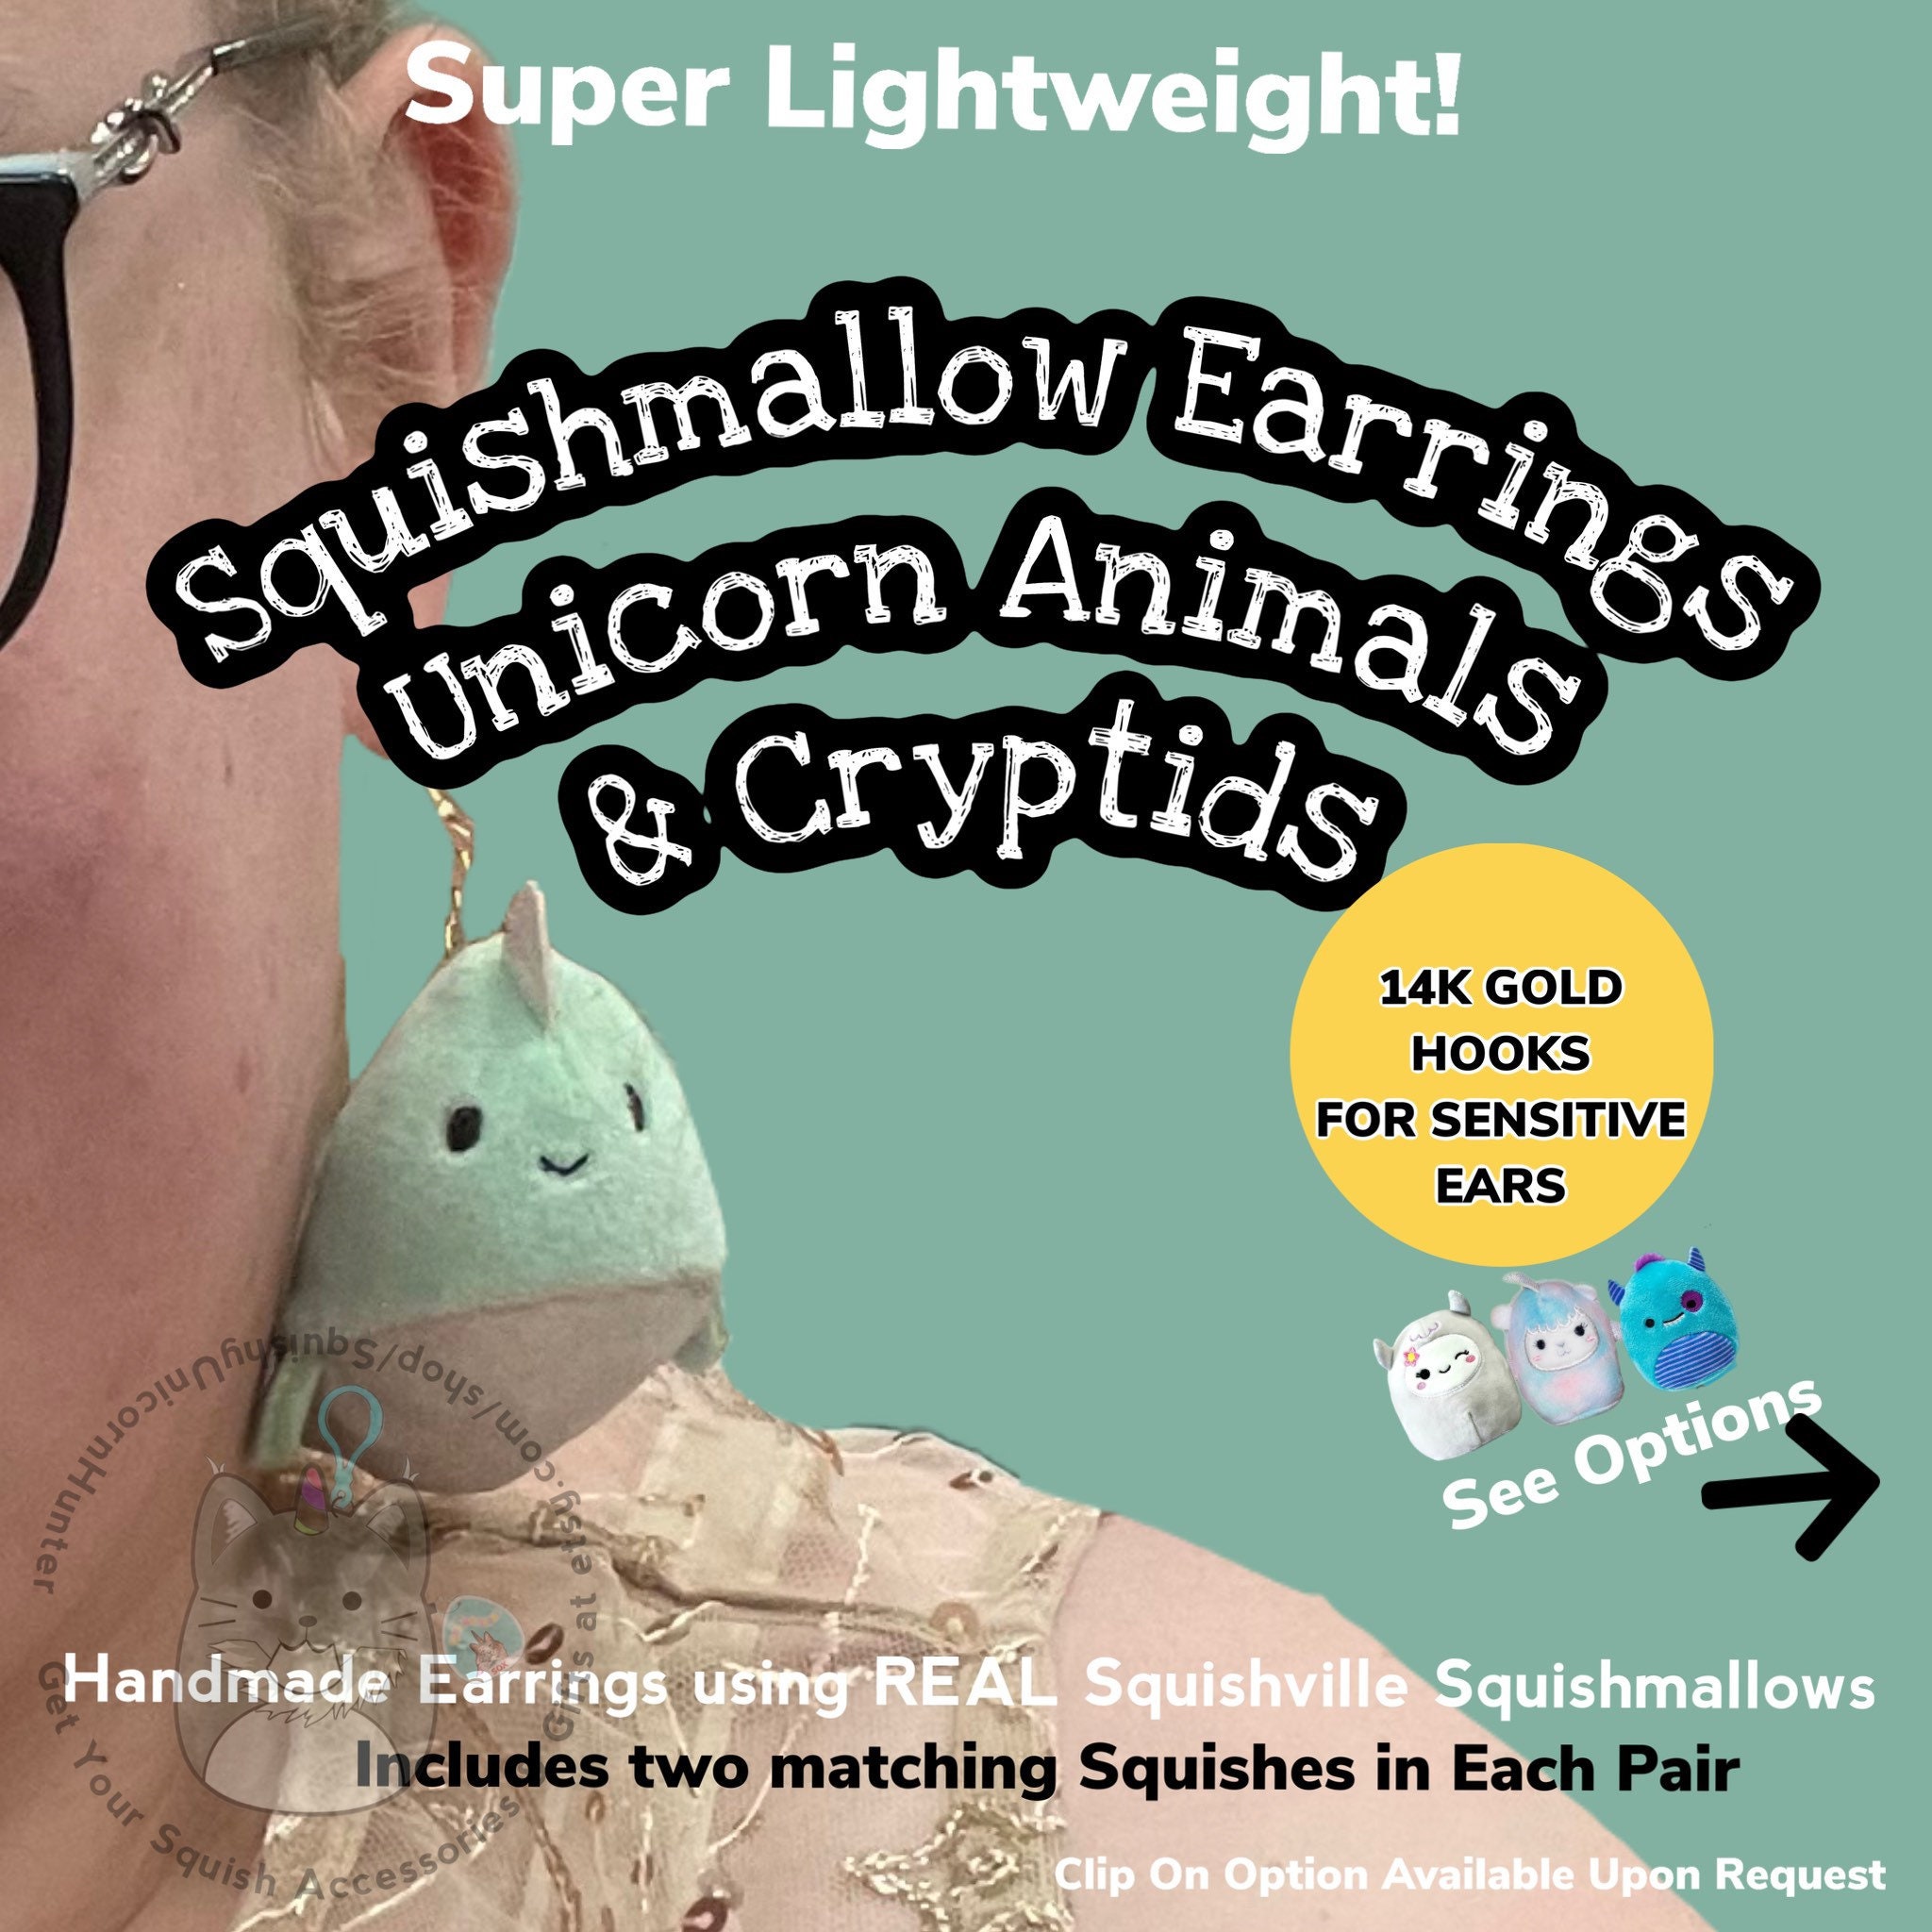 Unicorn Animals & Cryptids - Squishmallow Earrings - 2 Earrings - Real Squishville Toys Jewelry - Earrings Listing #4